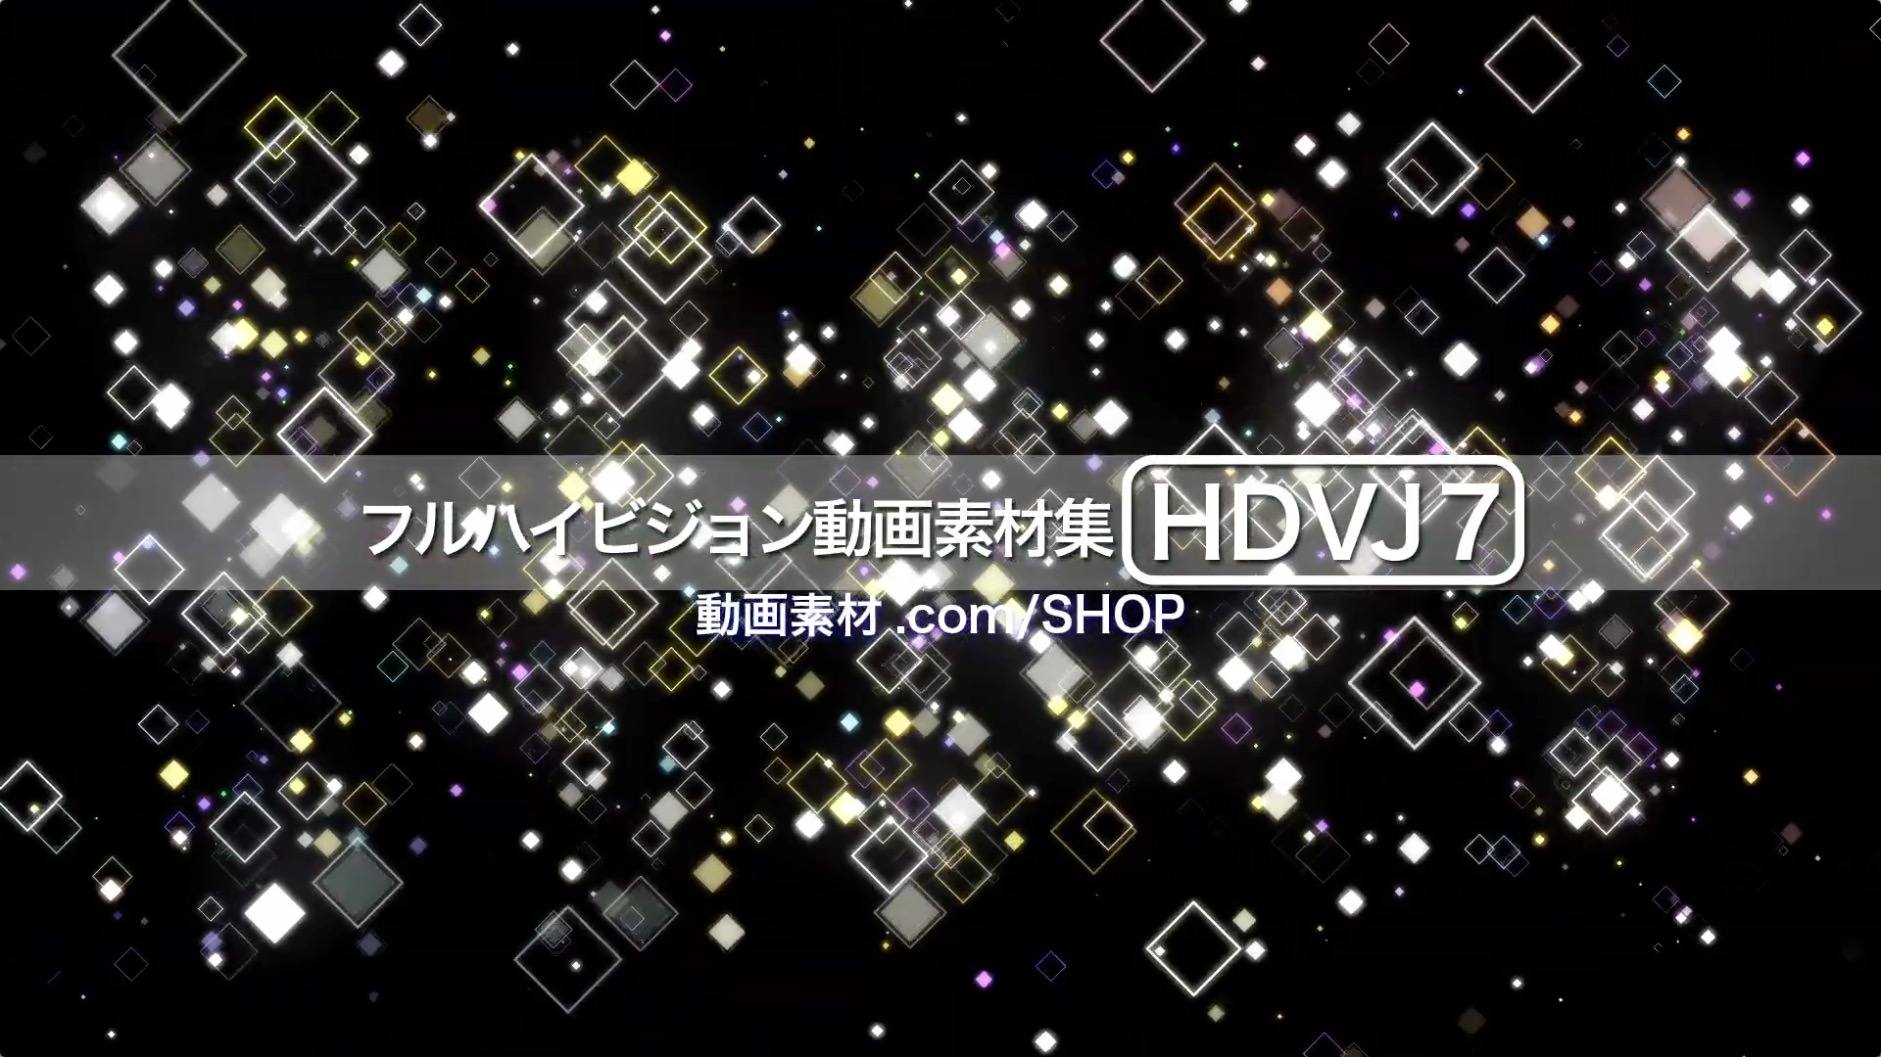 【MovieMaterial HDVJ6】フルハイビジョン動画素材集32